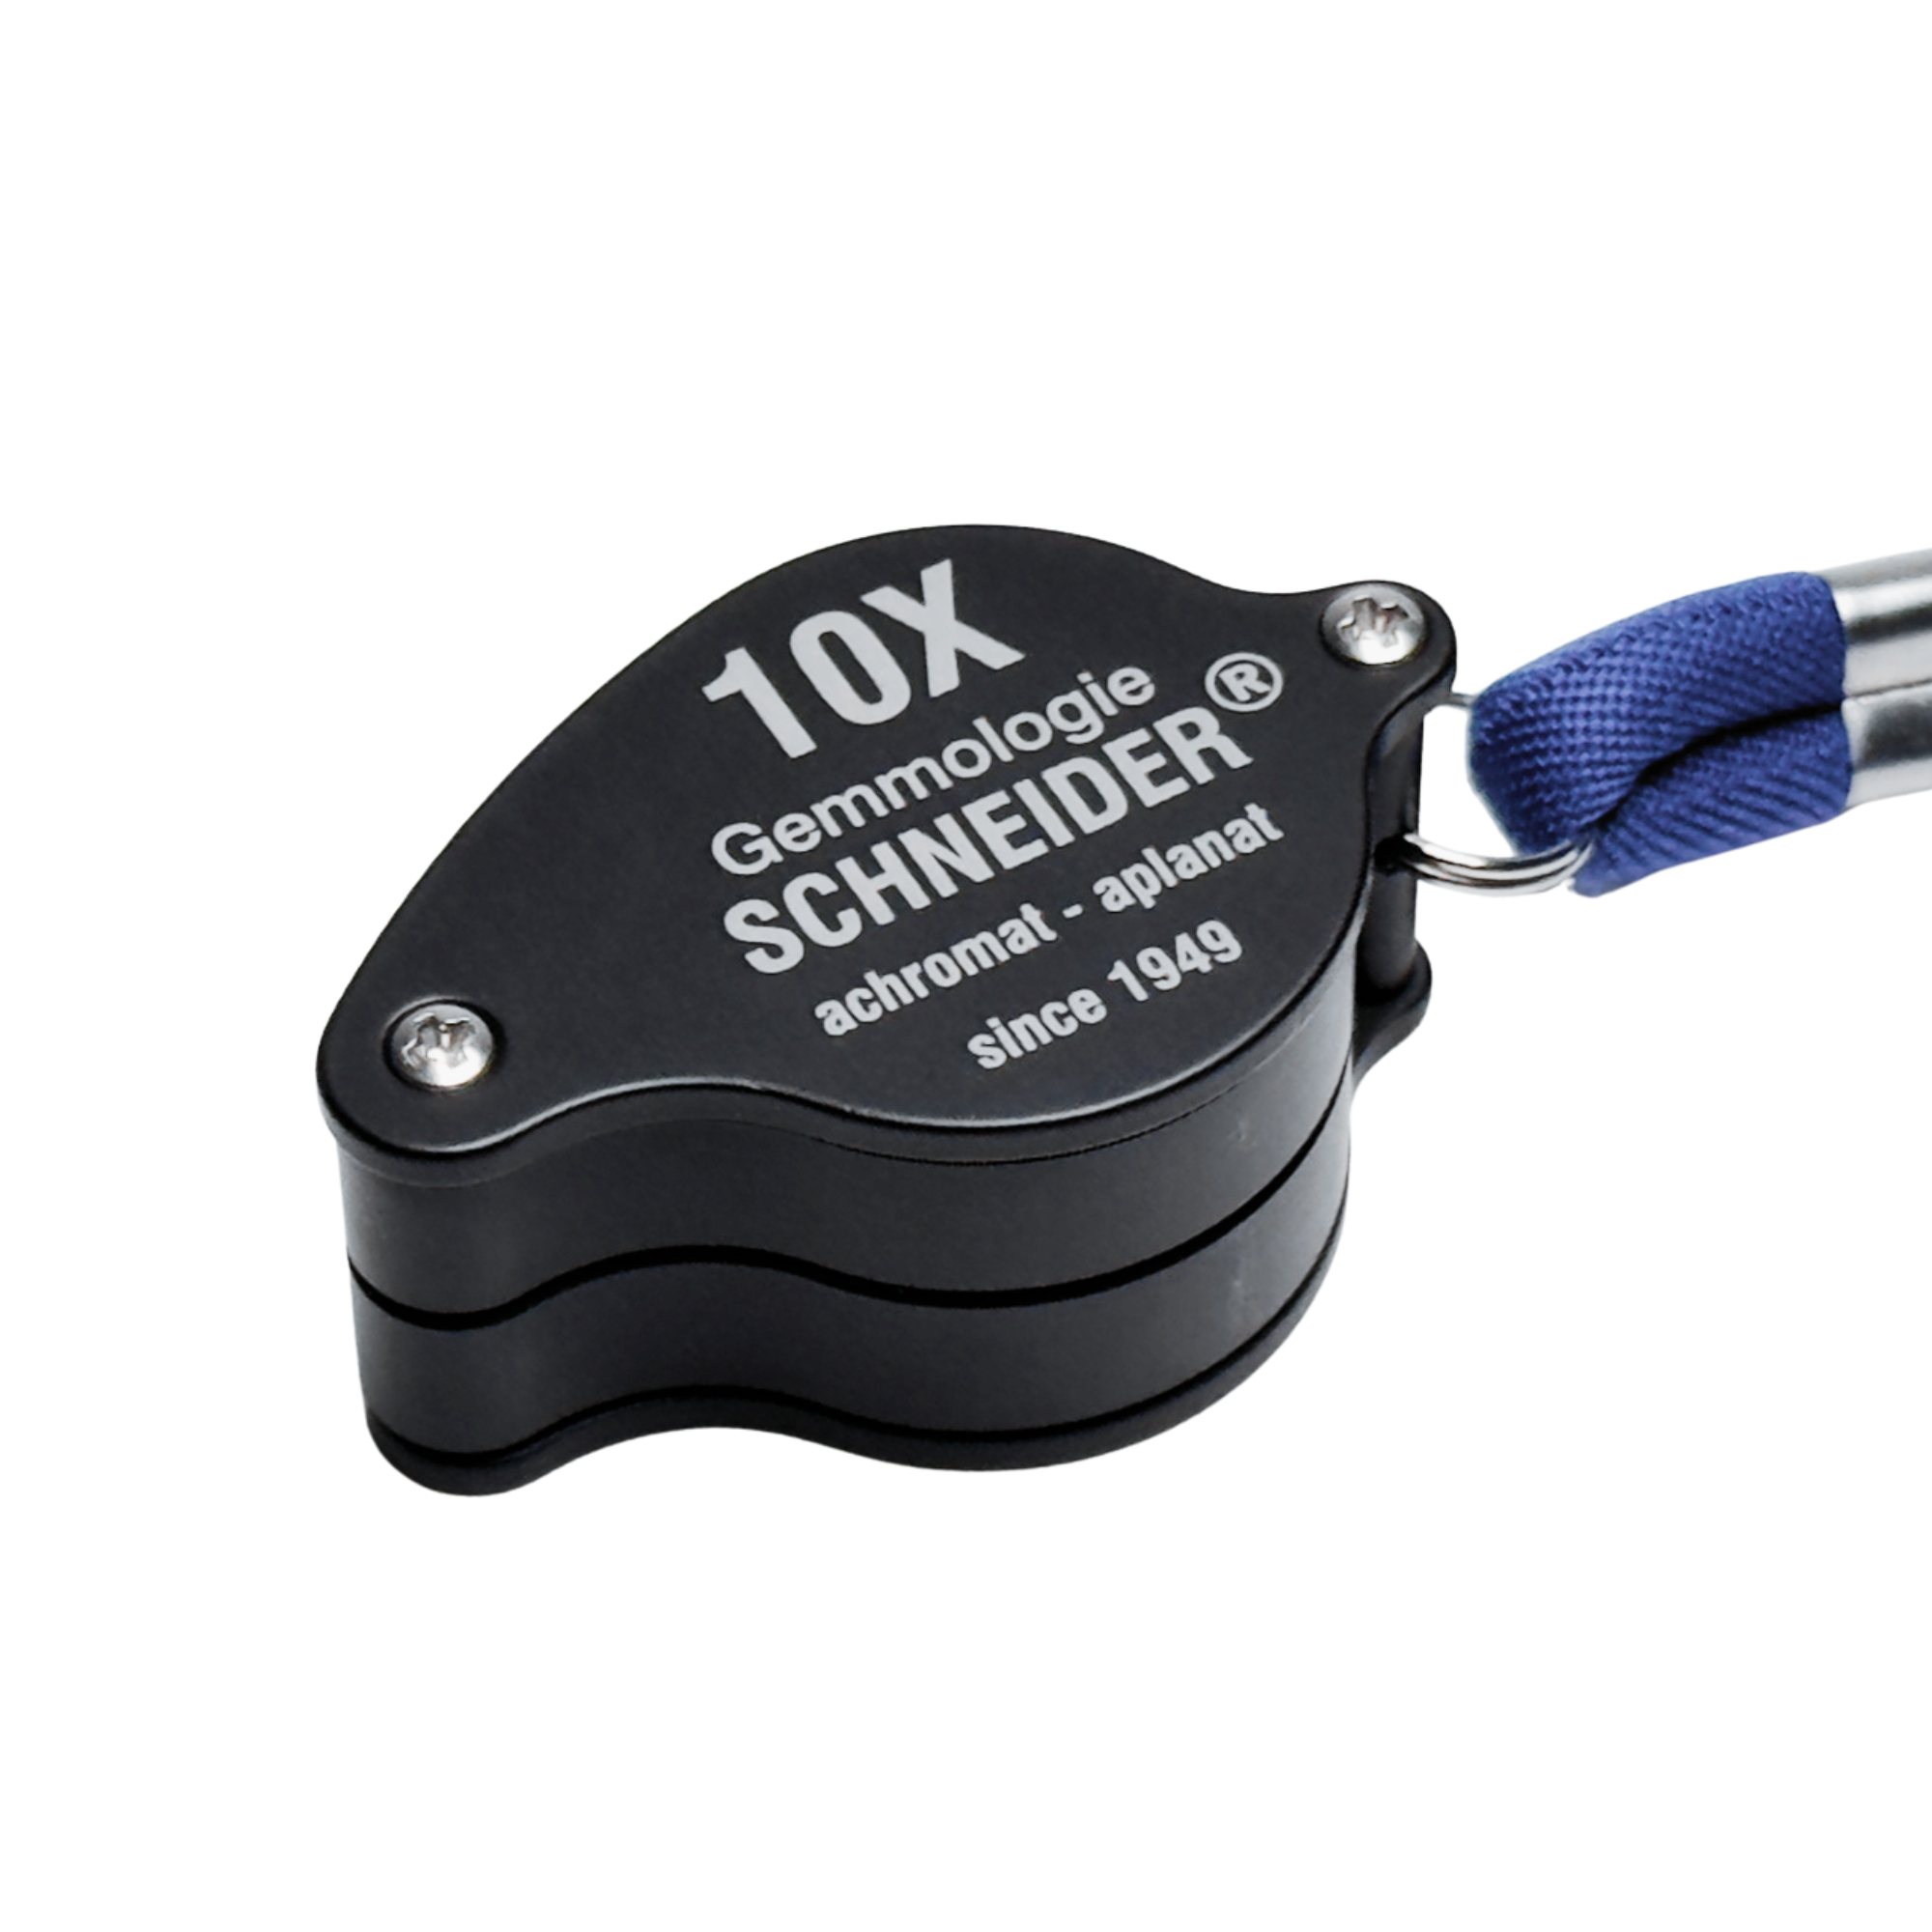 Harald Schneider Magnifier L2+ Premium Loupe with 10x magnification and full Achromat Aplanat correction